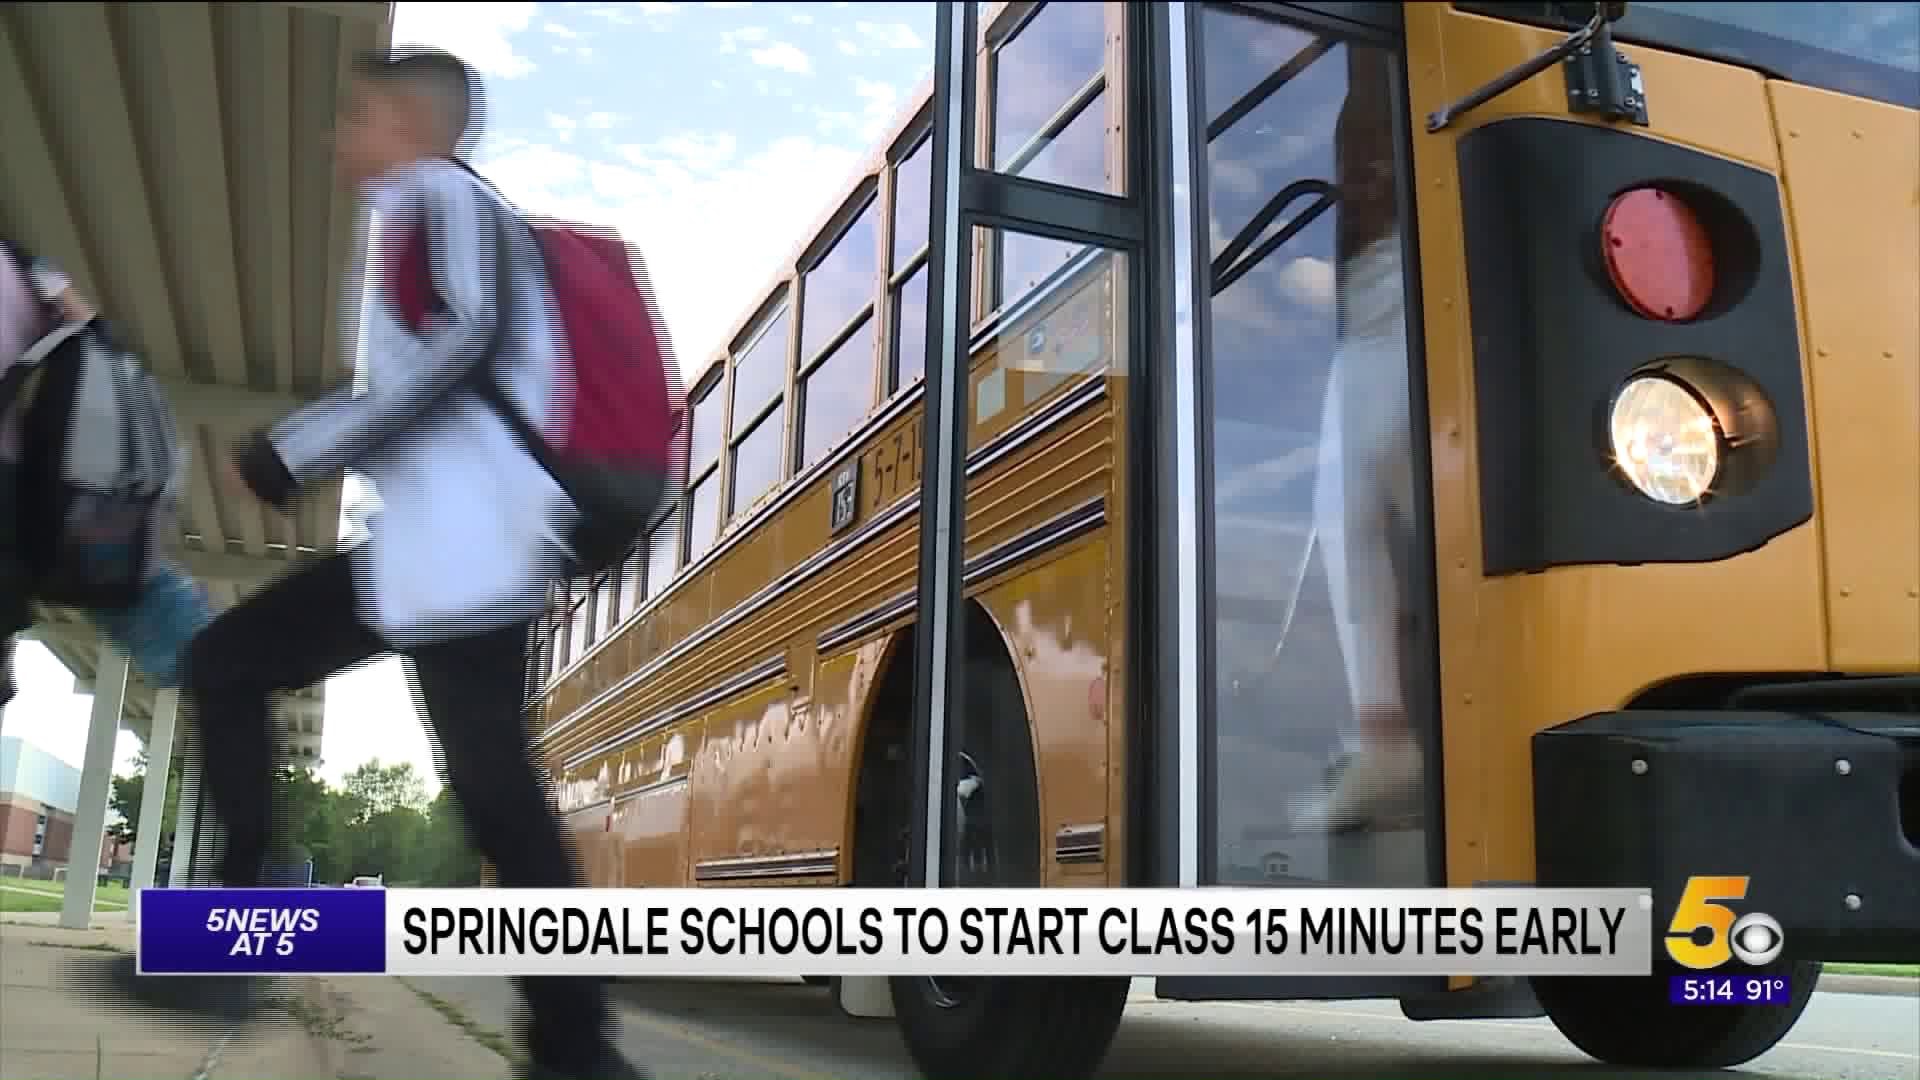 Springdale Schools To Start Class 15 Minutes Early